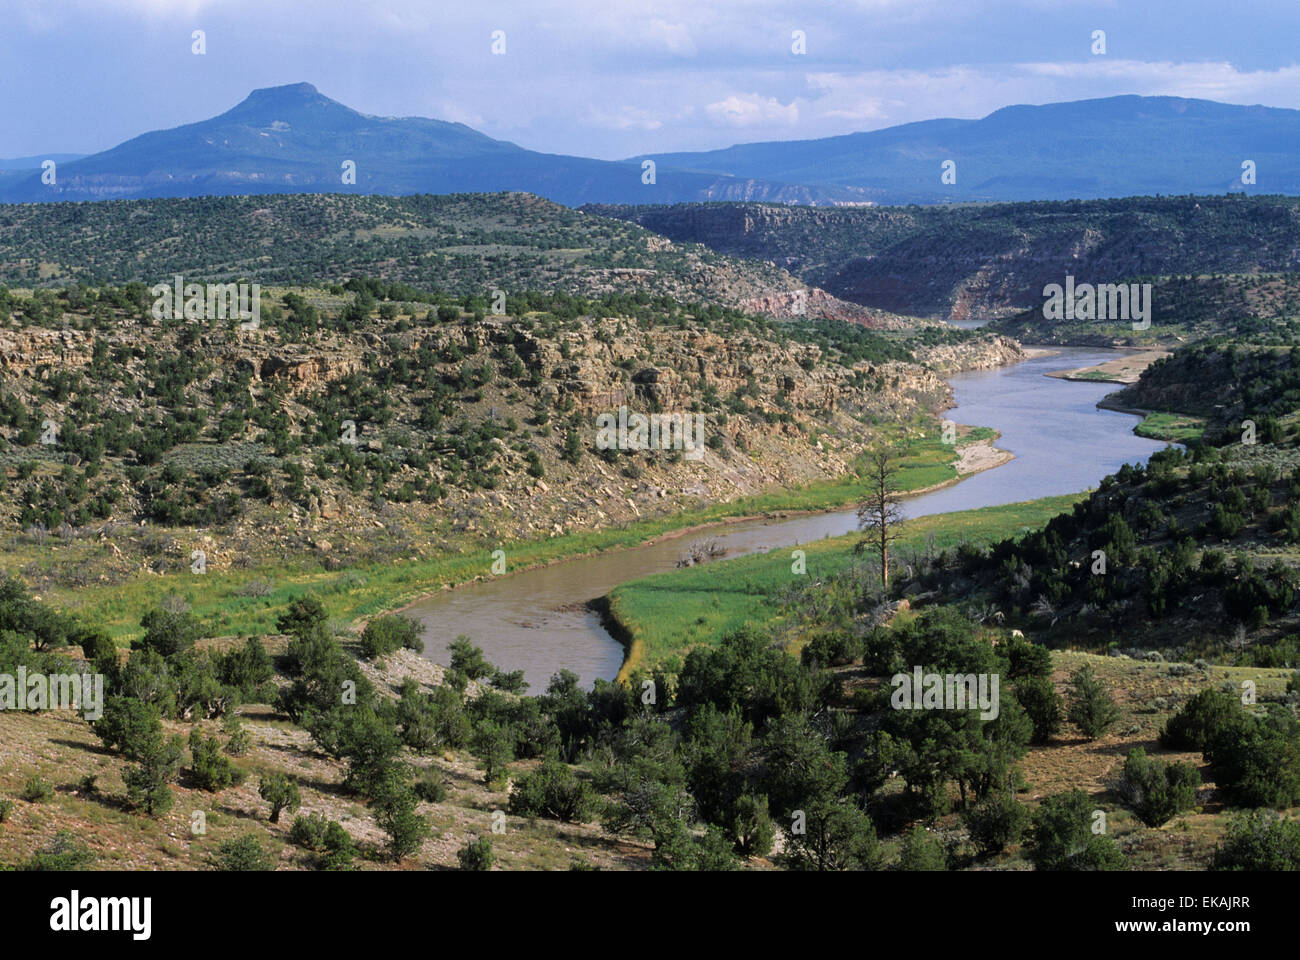 An idyllic view of the Chama River and Pedernal Peak in the Chama Wilderness Area near Abiquiu, New Mexico in summer. Stock Photo